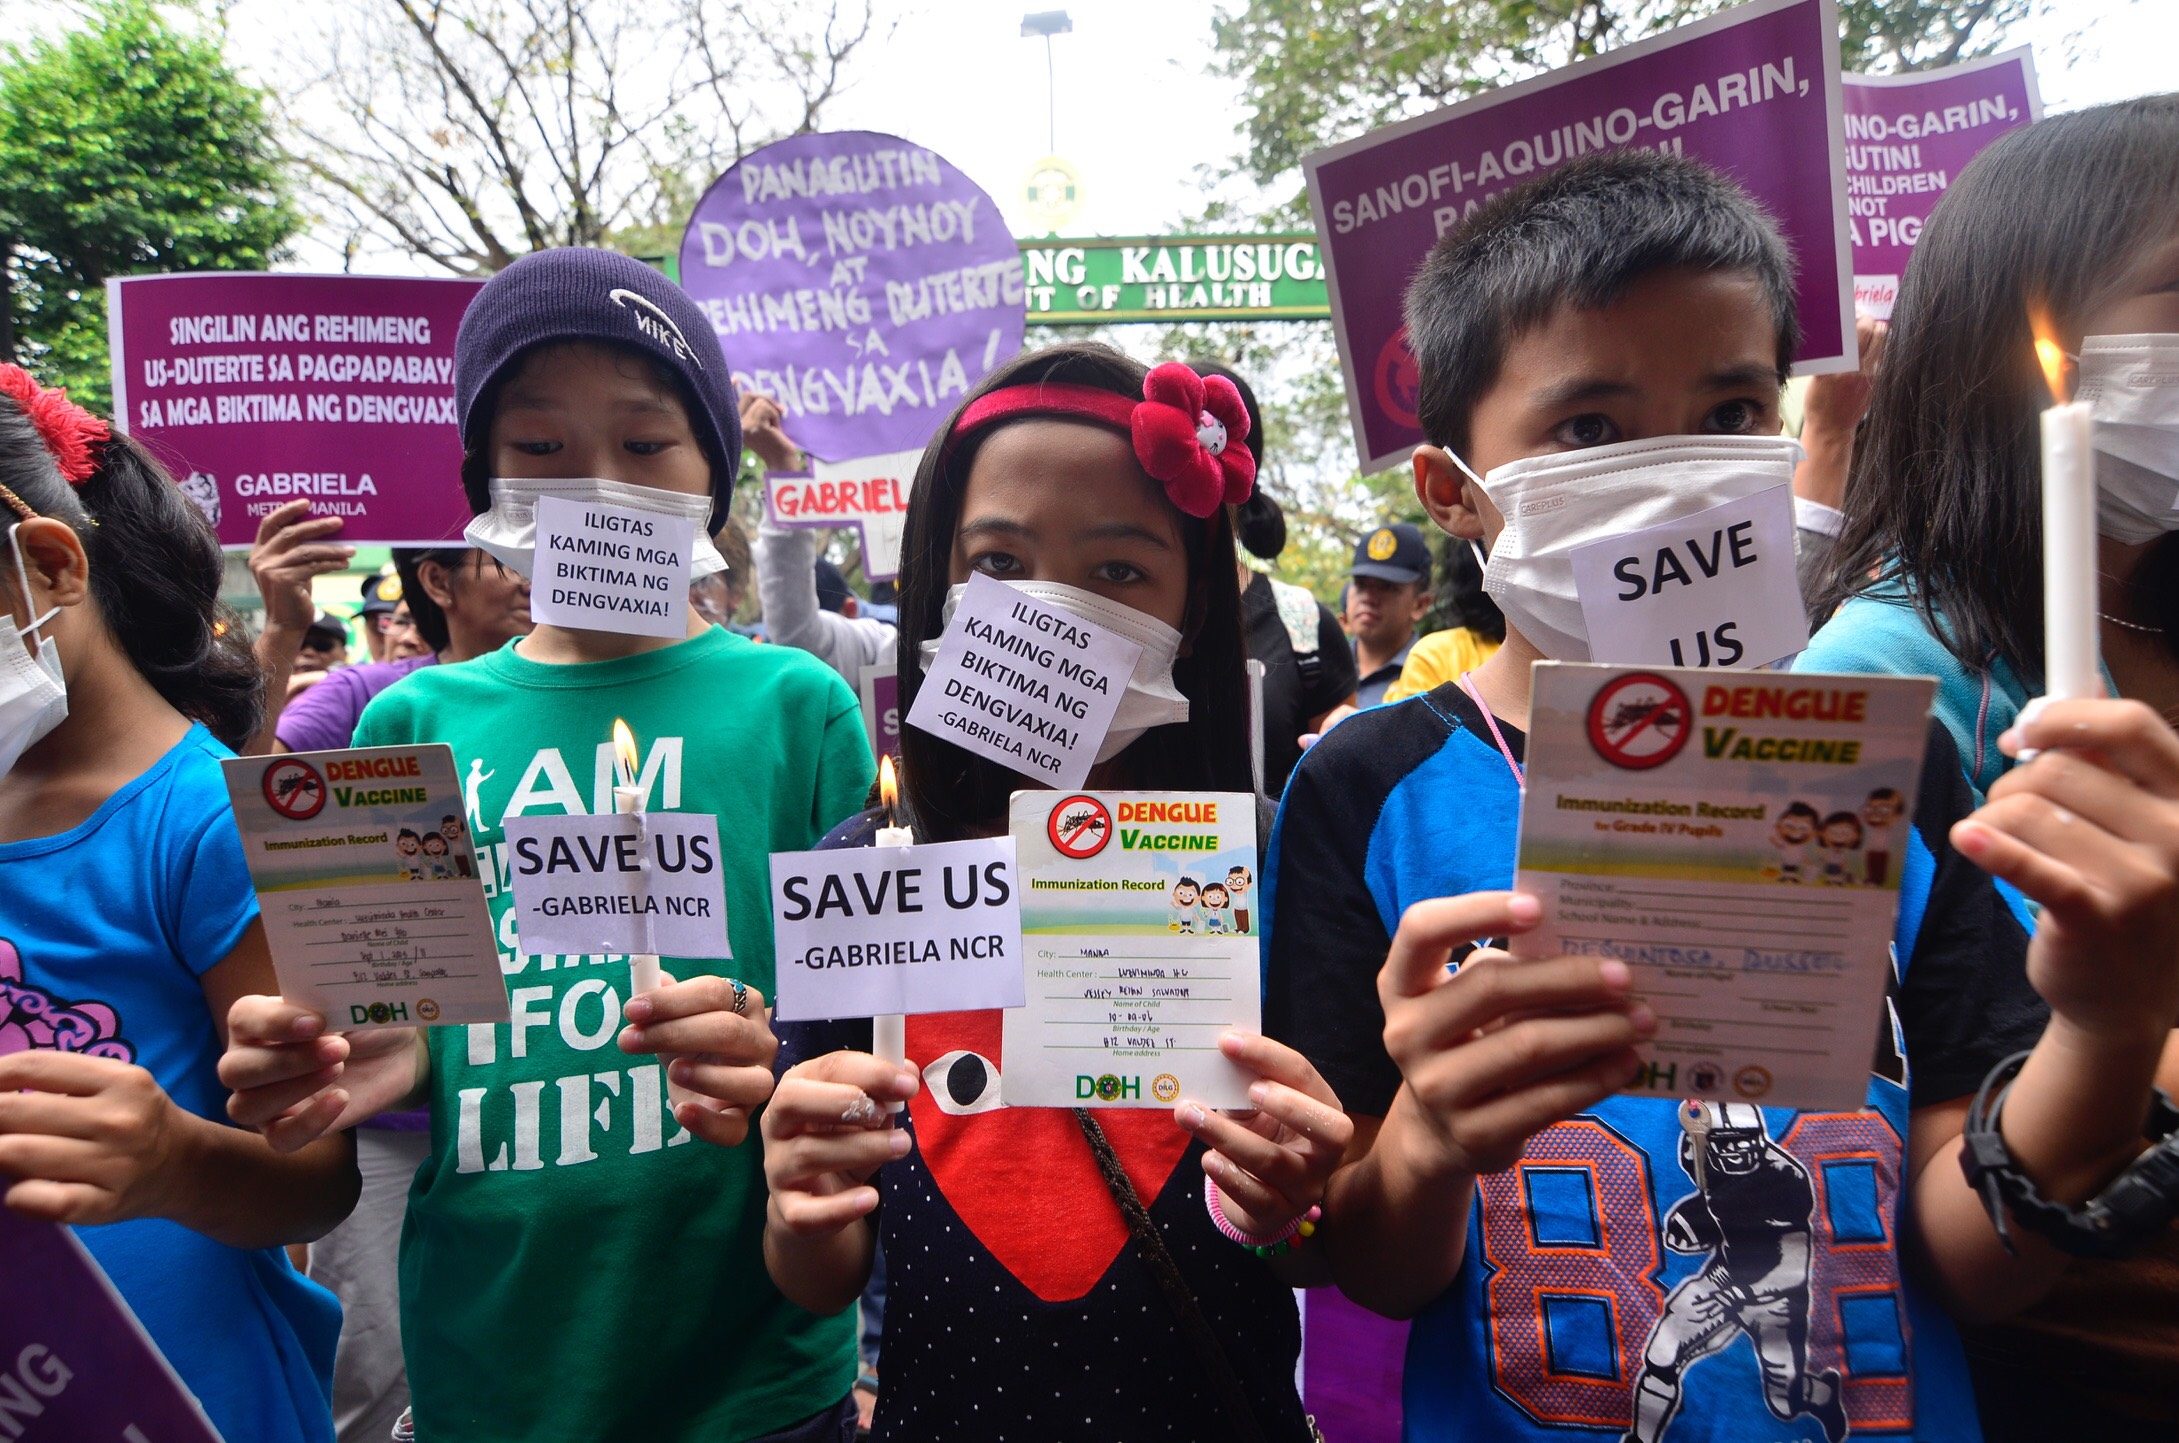 PROTESTS. Children vaccinated with Dengvaxia join their parents and activists in a protest at the DOH on February 7, 2018. Photo by Maria Tan/Rappler 